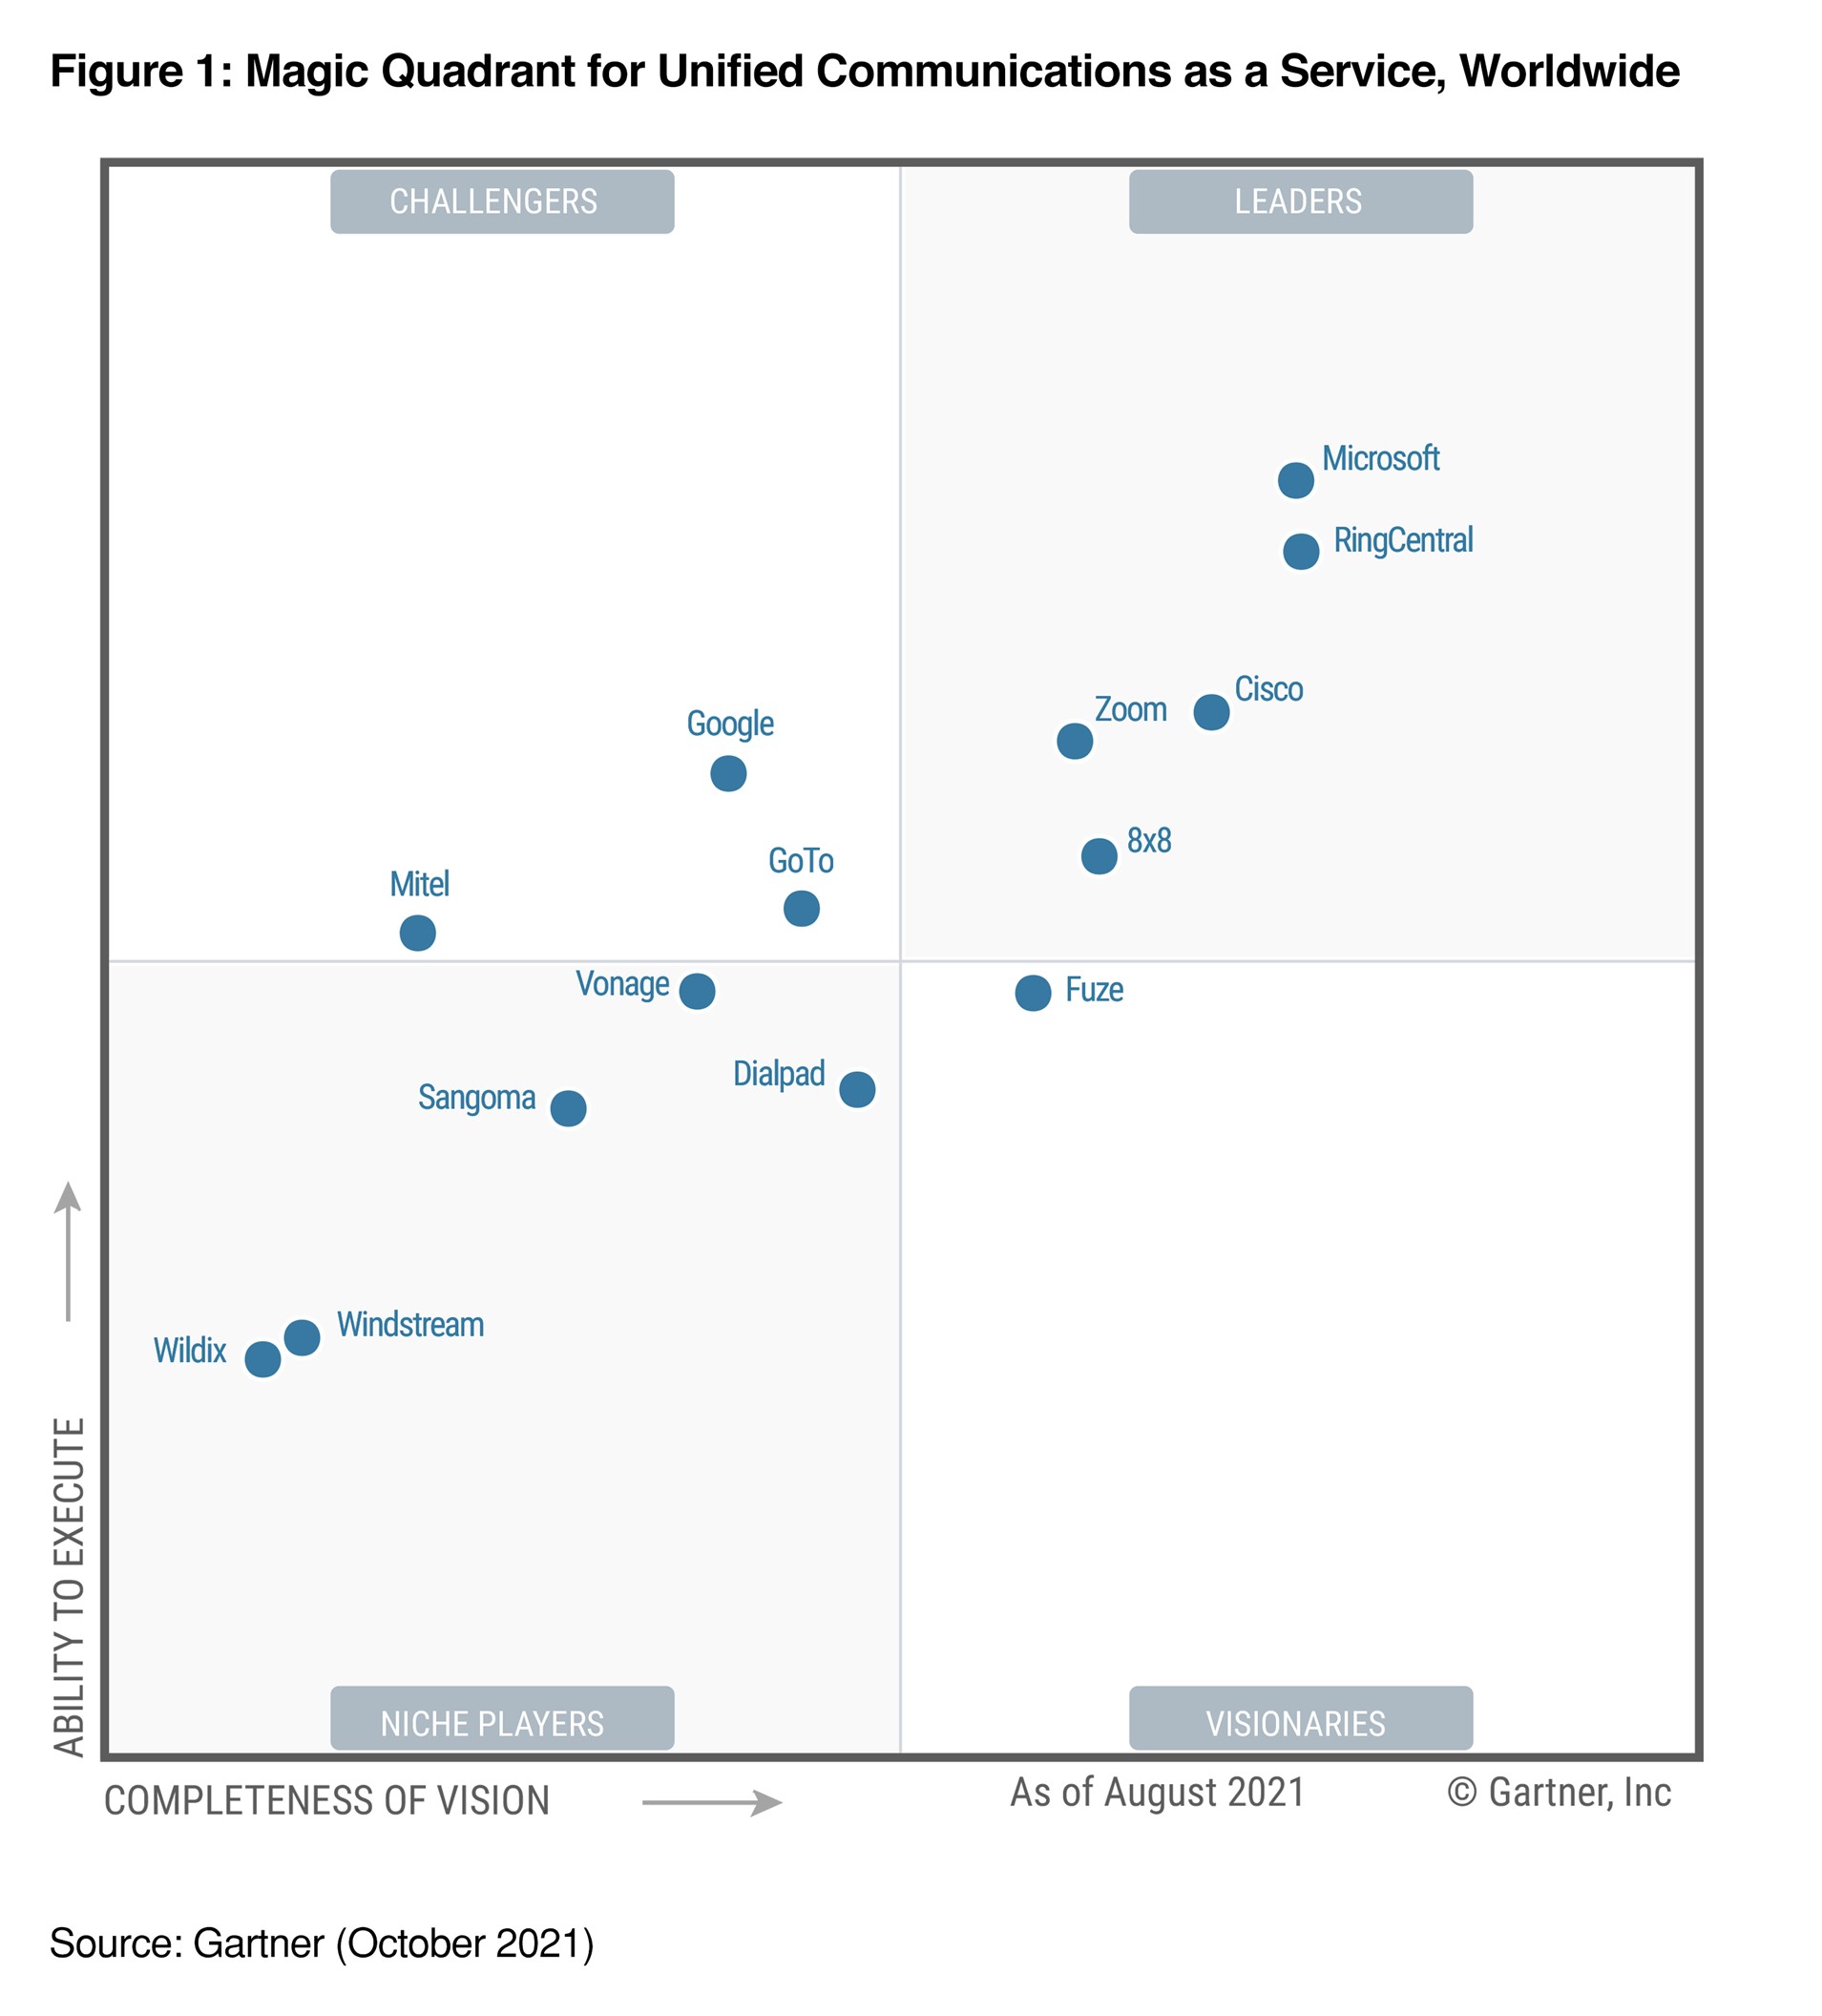 UCaaS MQ Graphic: Graphic with four quadrants listing the 14 vendors which were included in the research for Gartner Unified Communications as a Service Magic Quadrant report. The four quadrants shown are: Challengers (top left), Leaders (top right), Niche players (bottom left), and Visionaries (bottom right). Microsoft, RingCentral, Cisco, Zoom, and 8x8 are recognized as leaders. 